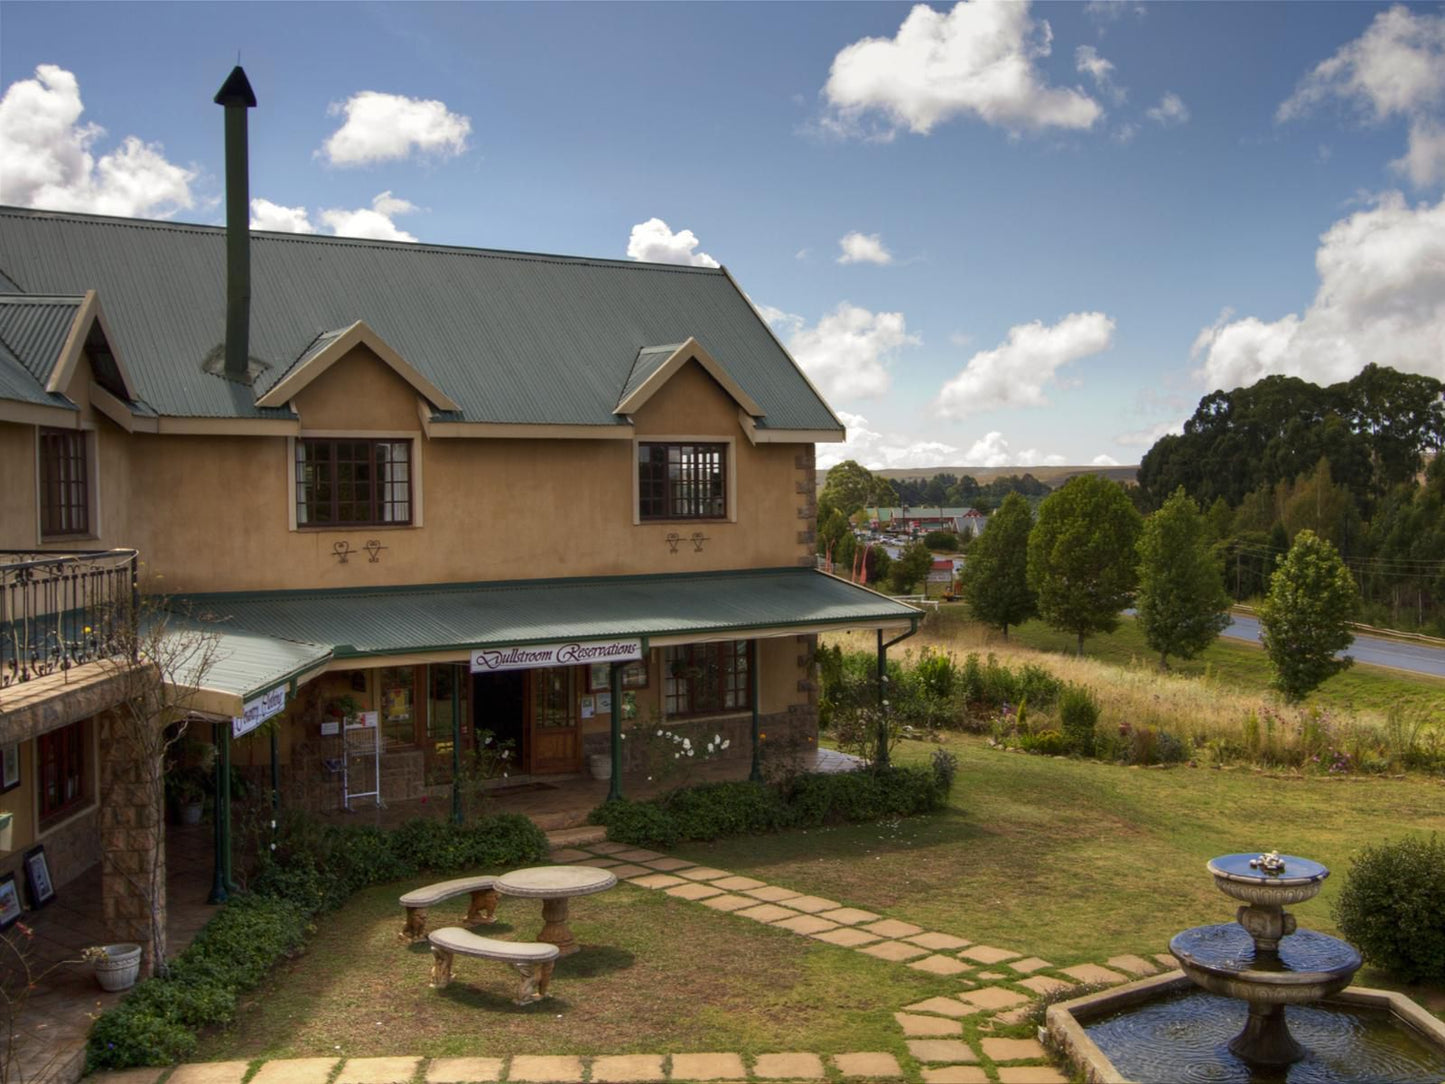 Auldstone House Dullstroom Mpumalanga South Africa House, Building, Architecture